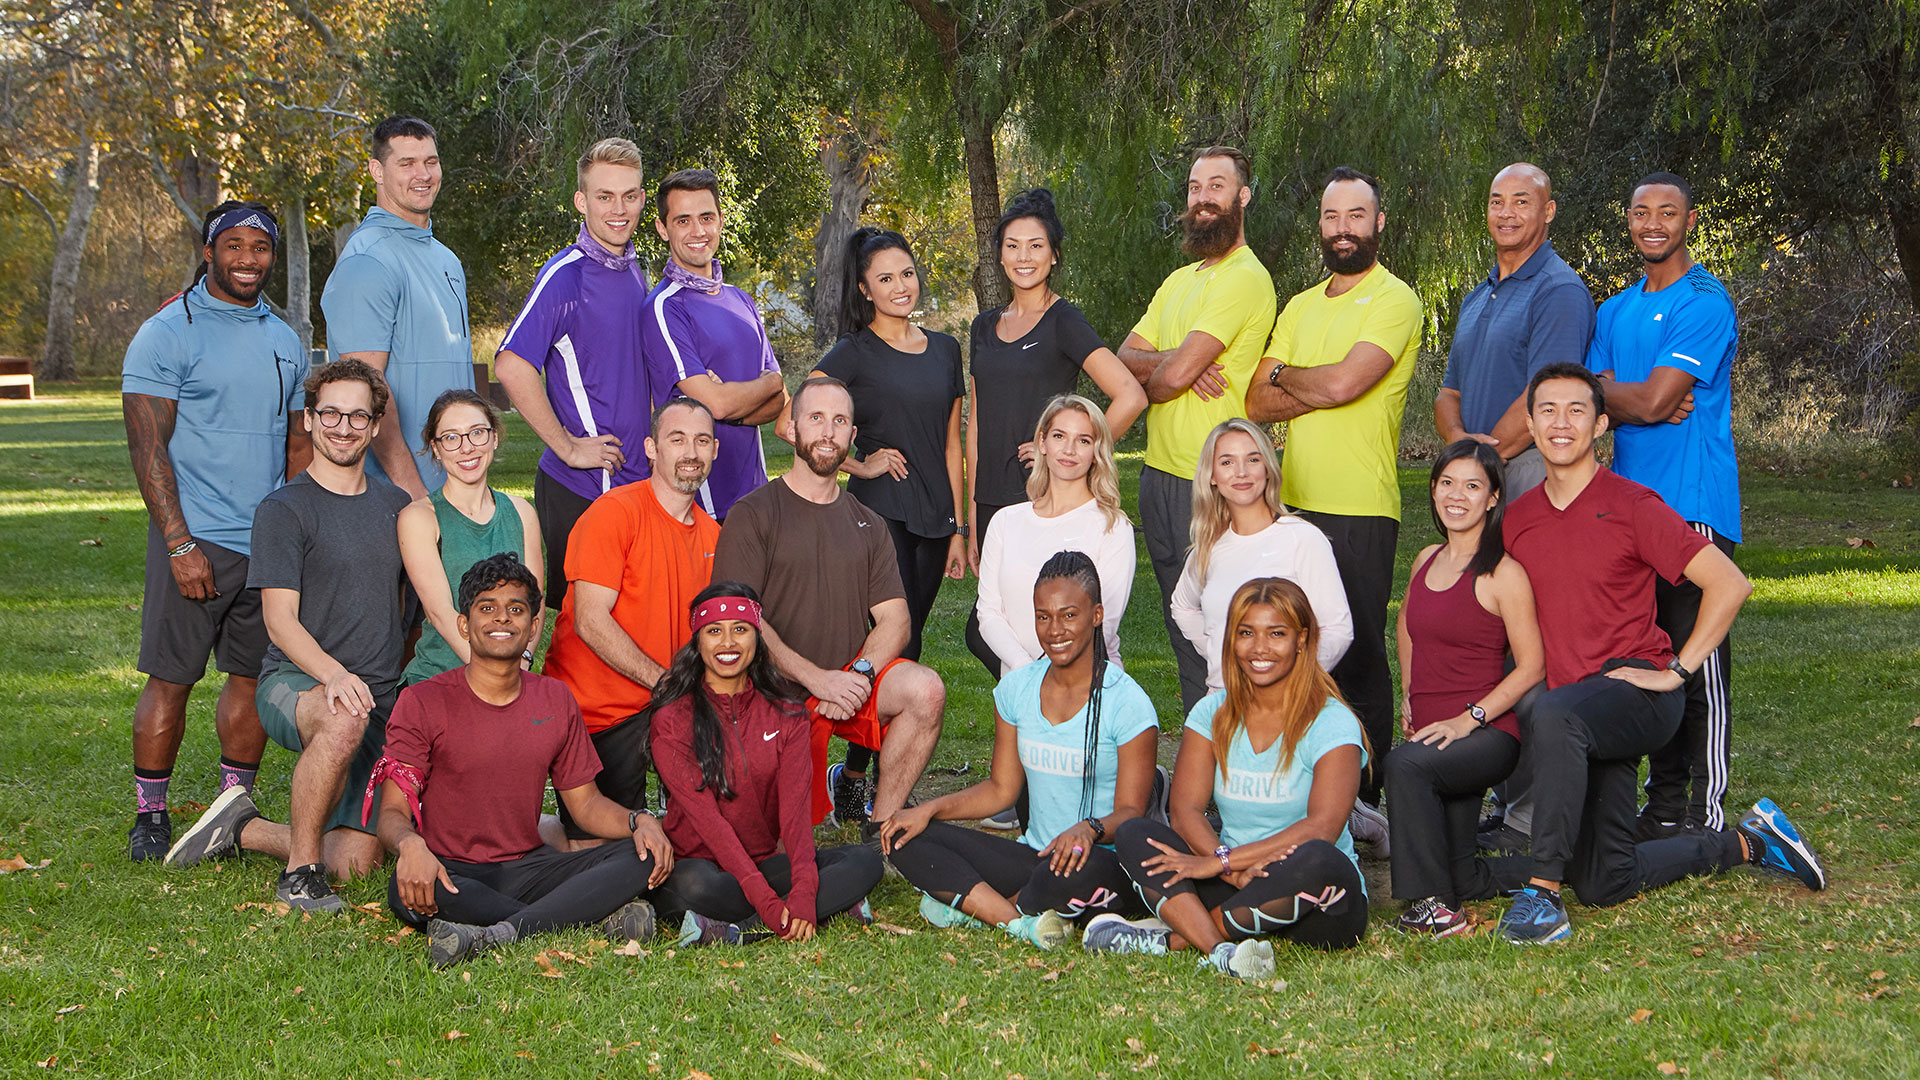 Don't miss the Season 32 premiere of The Amazing Race on Wednesday, Oct. 14 at 9/8c. 